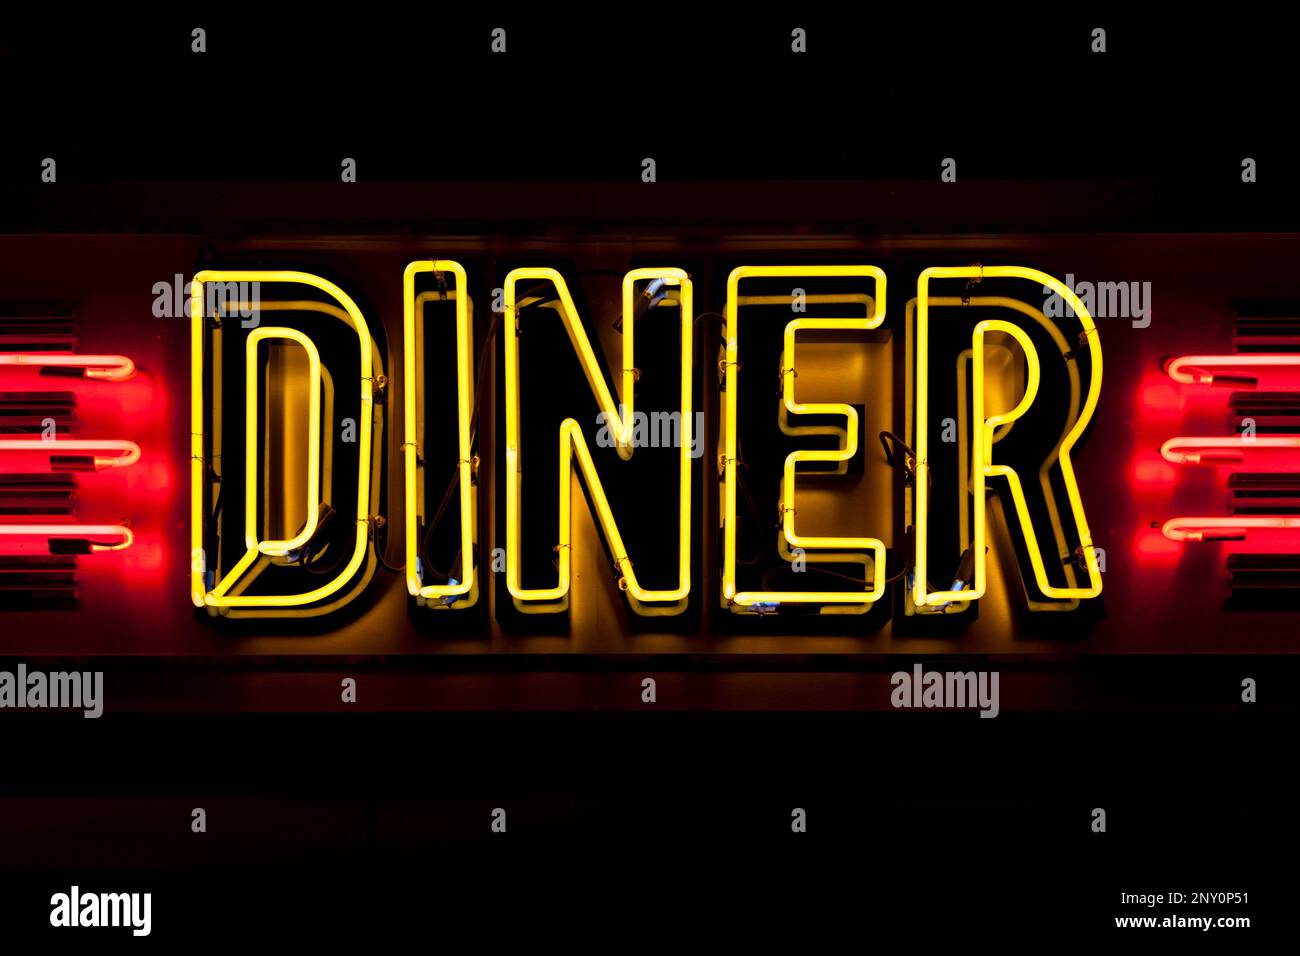 Close-up on a neon light shaped into the word 'Diner'. Stock Photo